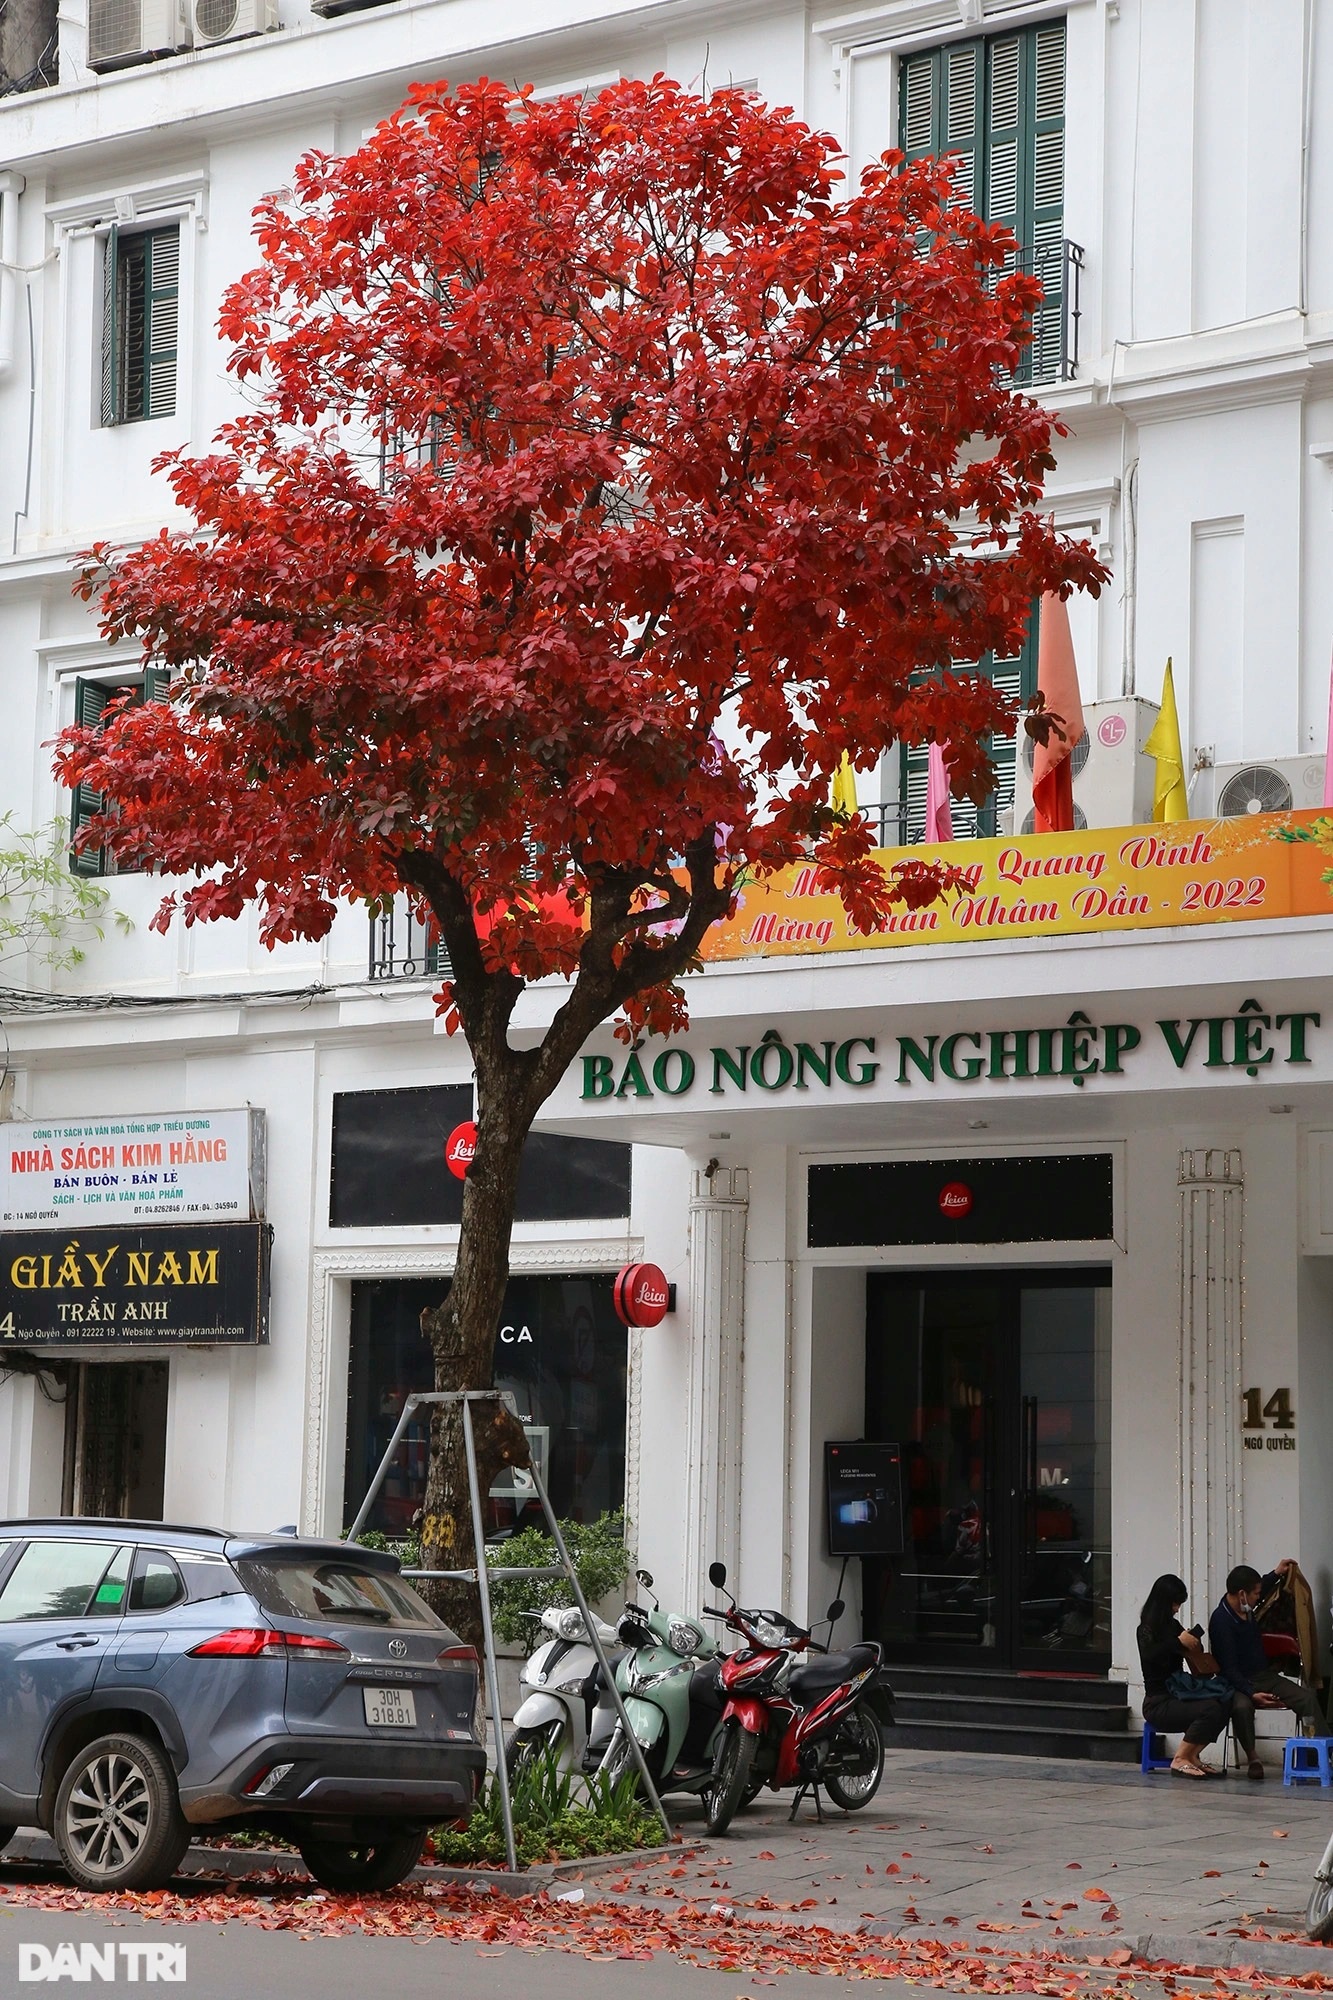 Hanoi is golden in the season when the trees change leaves, young people flock to take pictures - 12